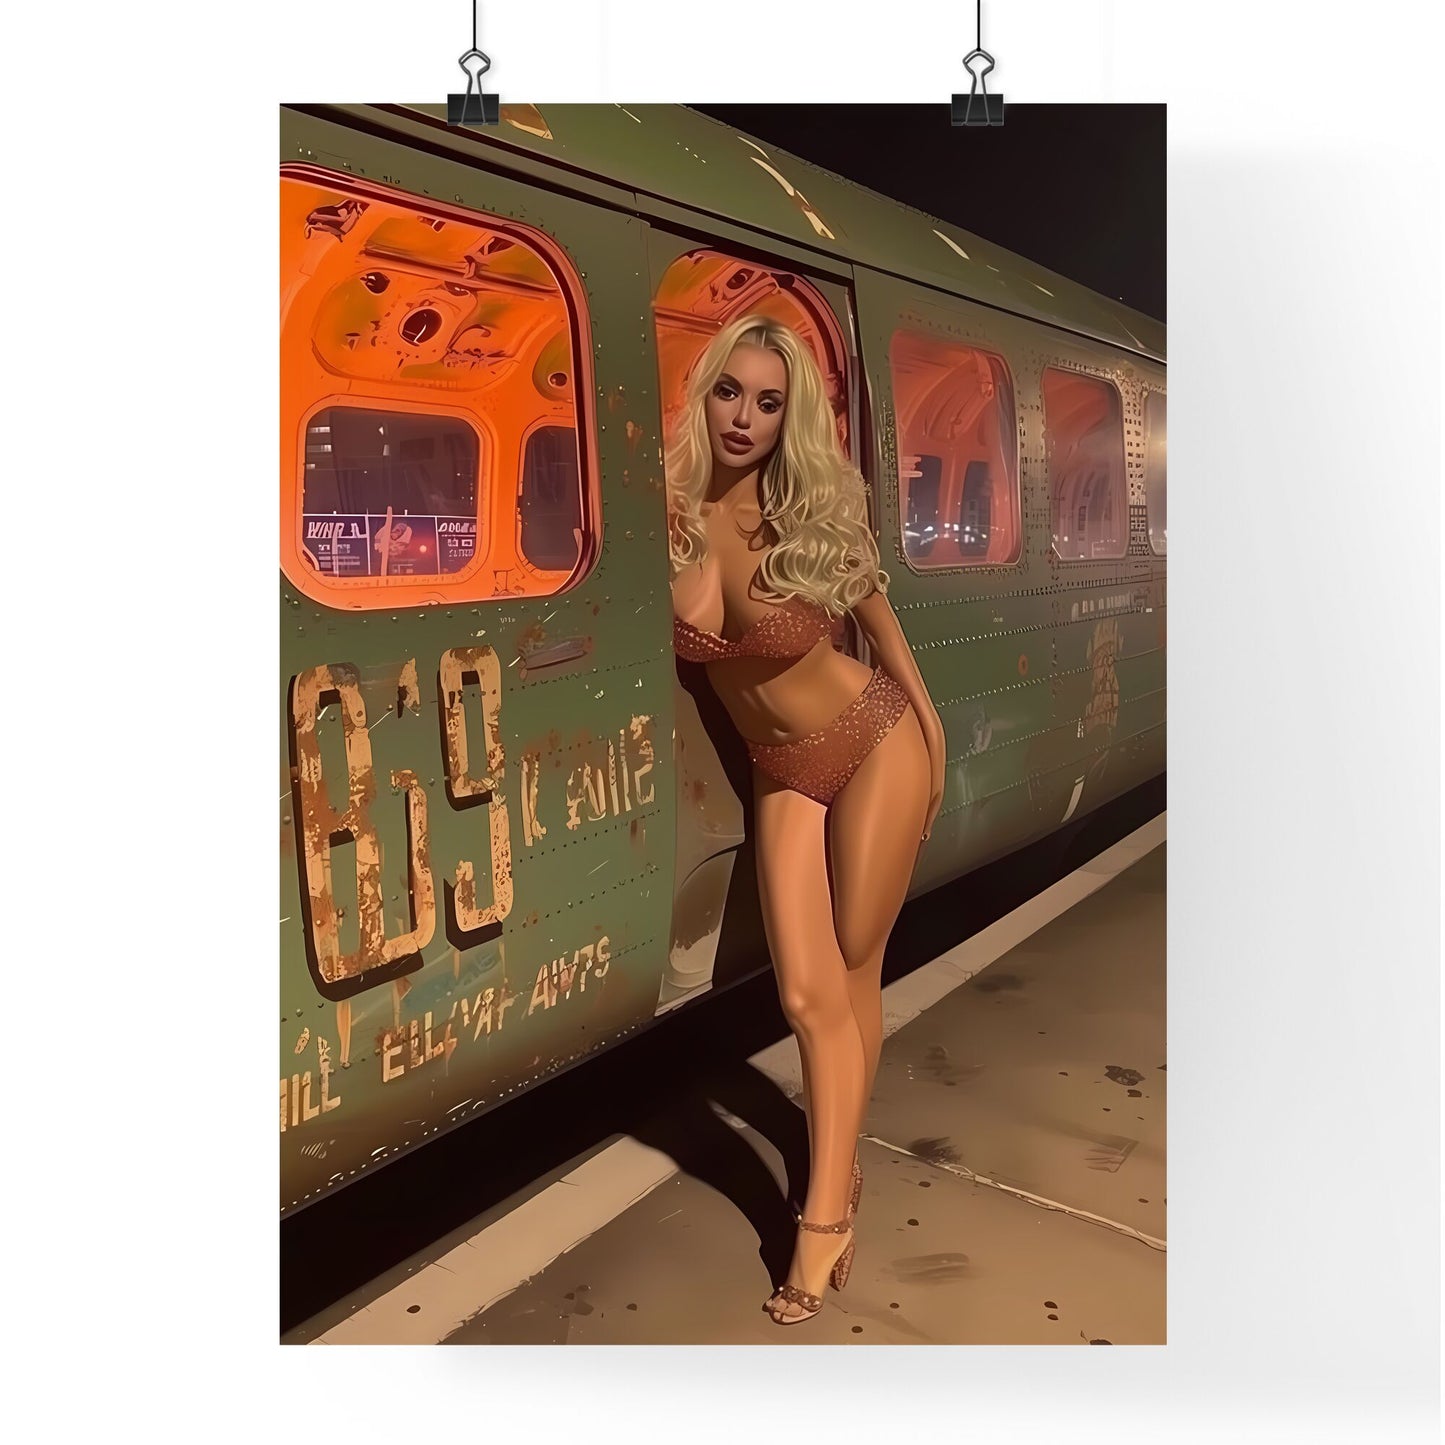 Gorgeous world war 2 era pin up Japanese woman painted on the side of a b52 bomber plane - Art print of a woman in a garment leaning on a train Default Title